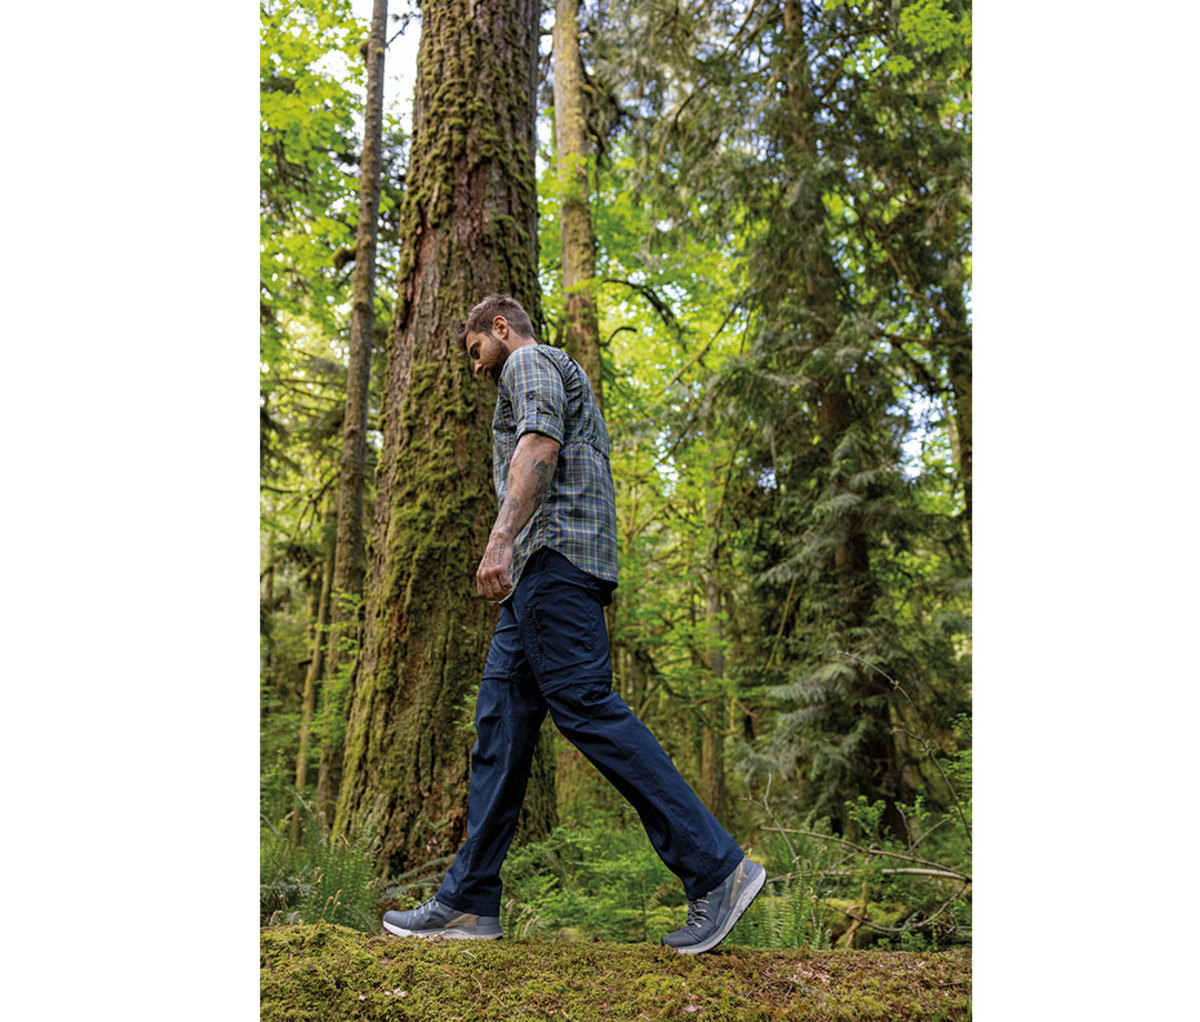 Man wearing flannel shirt and blue pants walking through woods